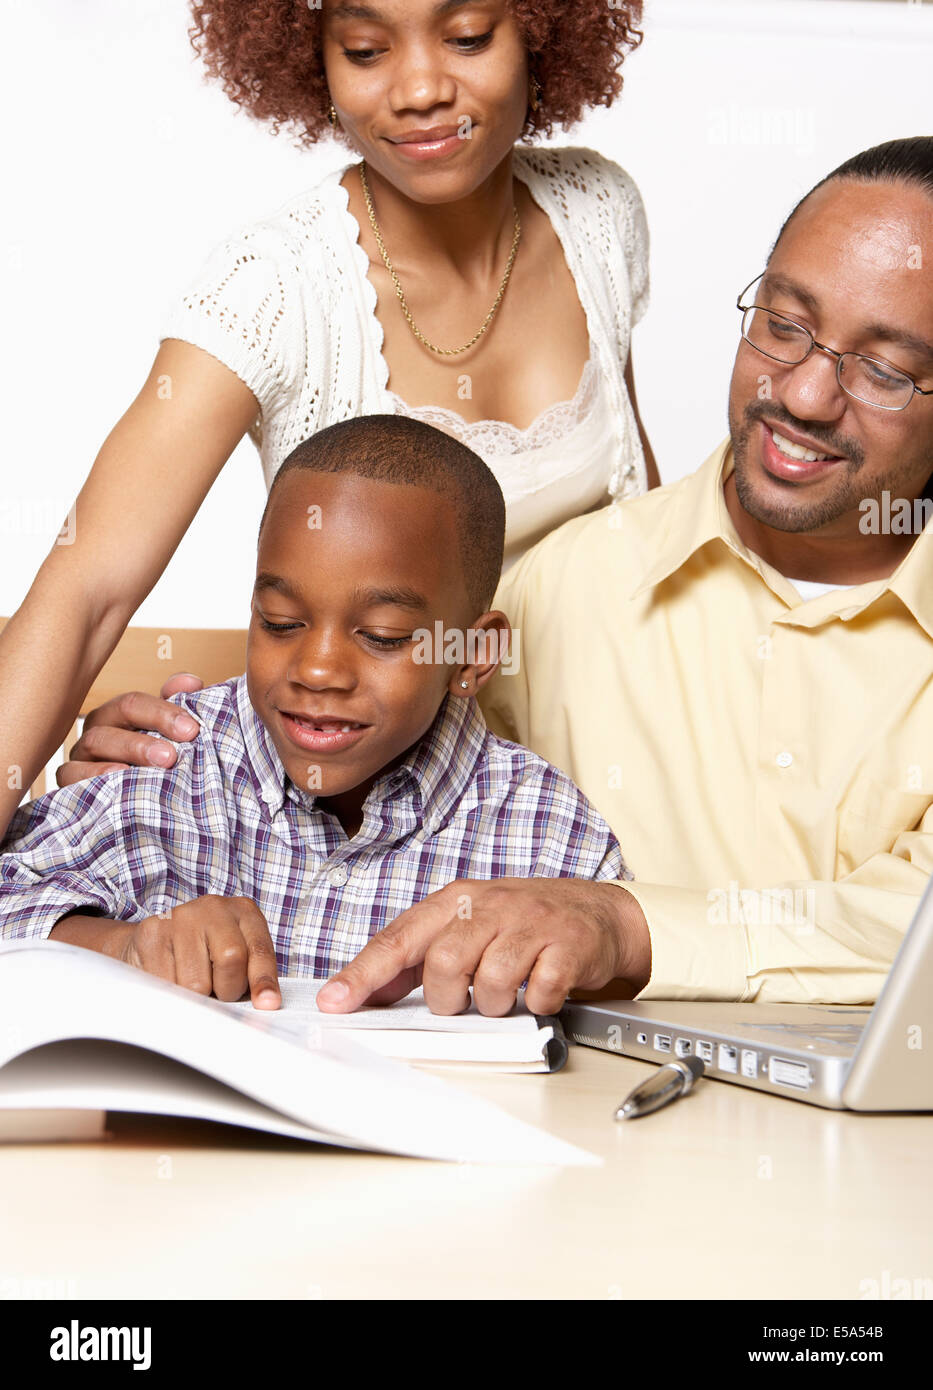 African American parents helping son with homework Stock Photo